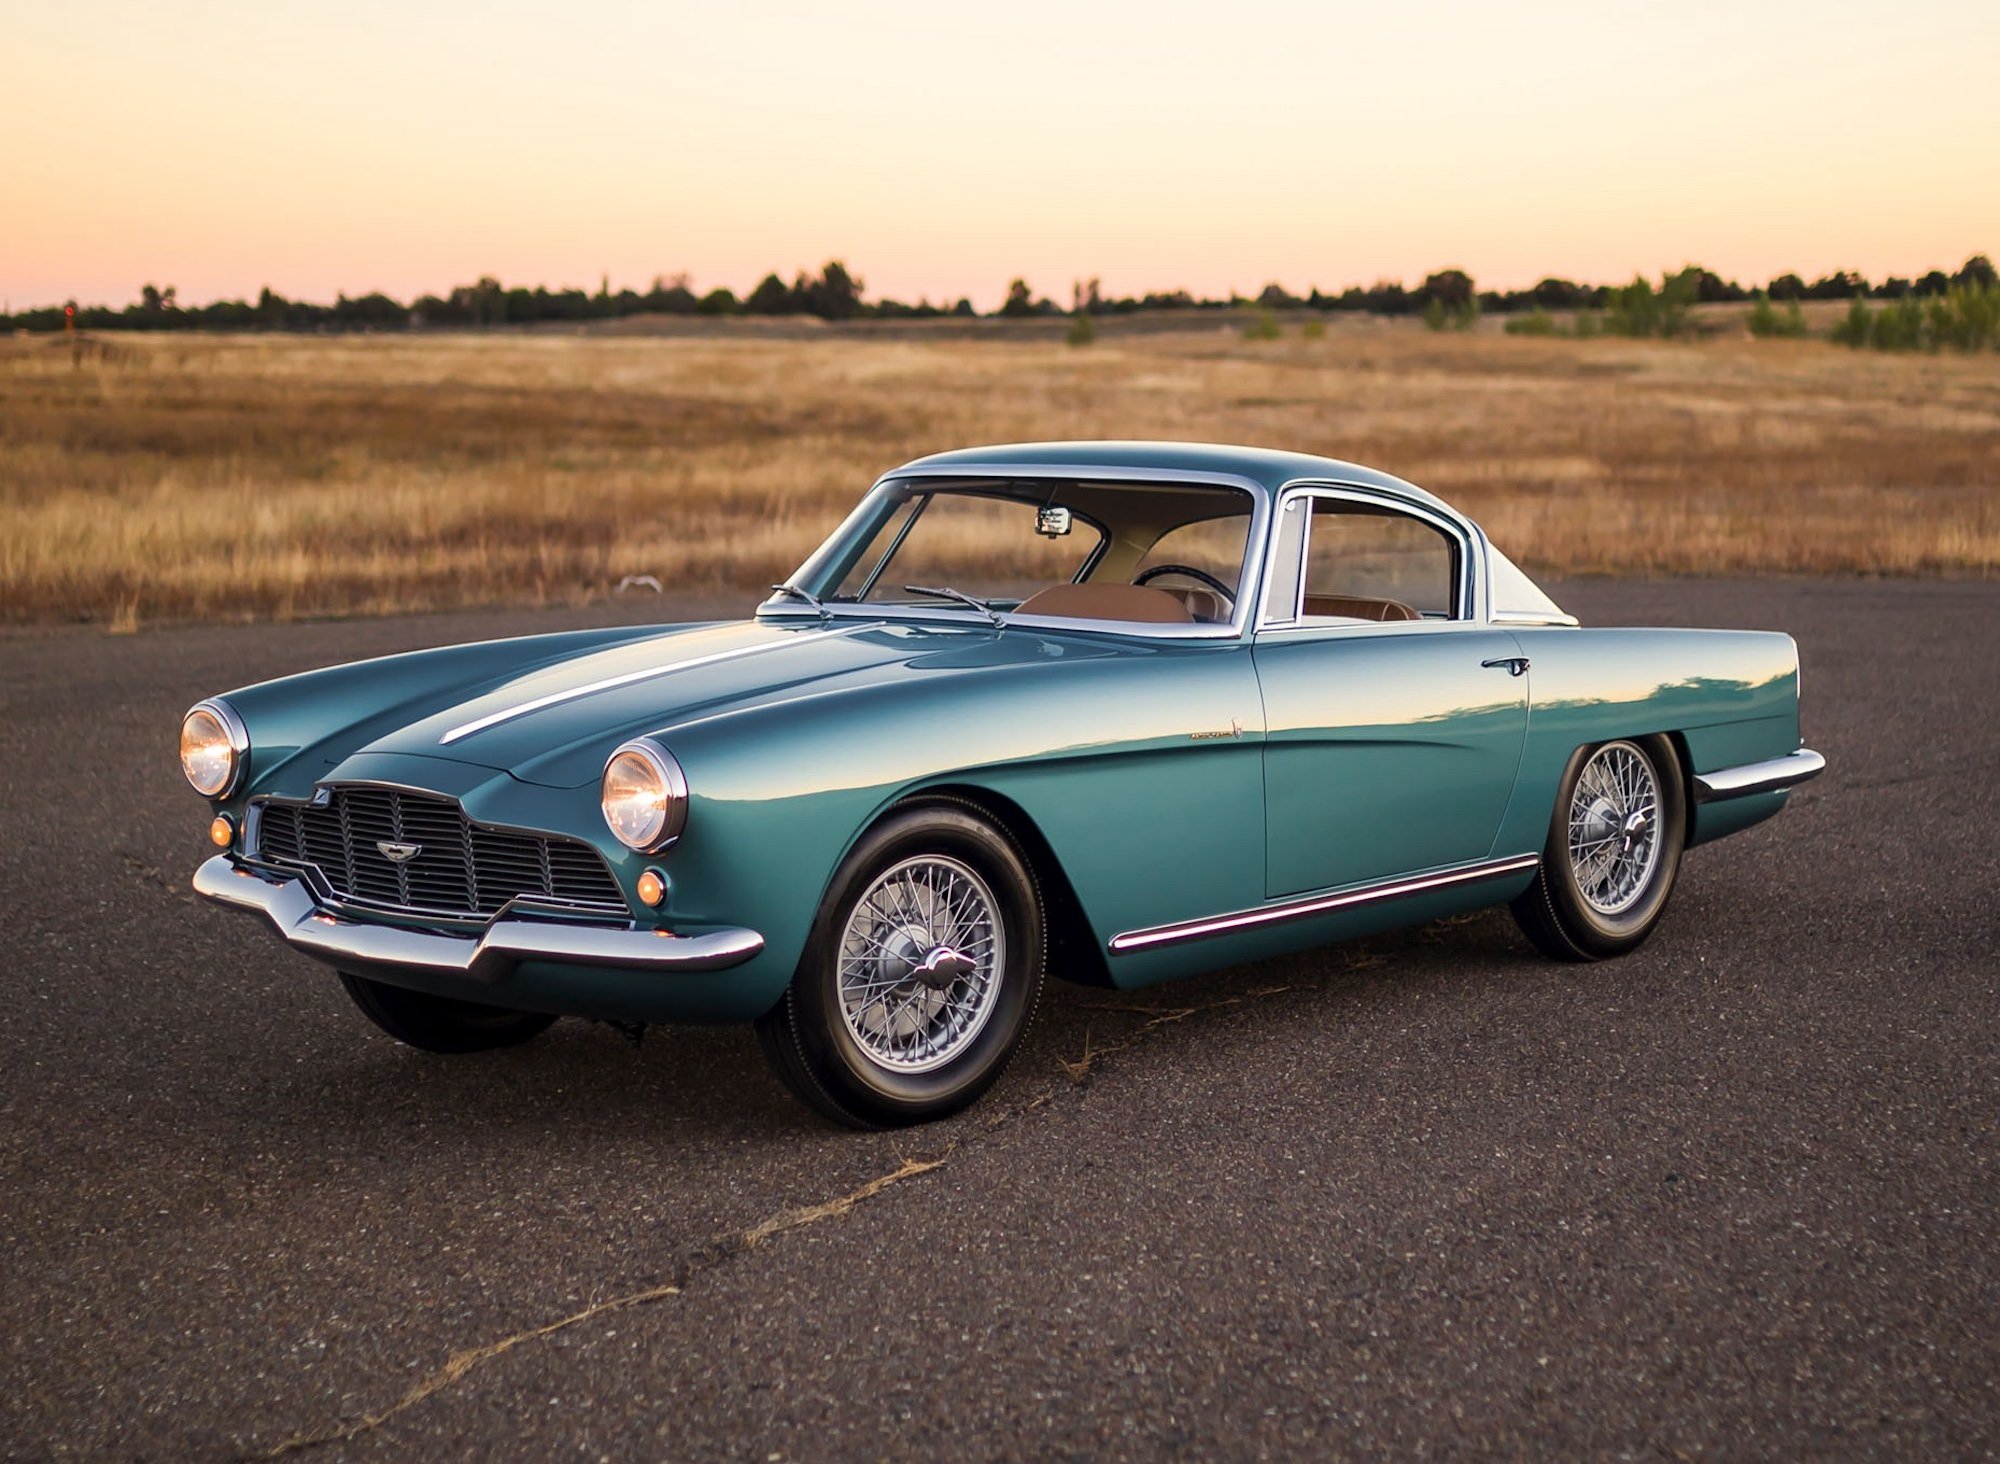 This Is The Solely Bertone-Constructed Aston Martin DB2/4 Ever Made